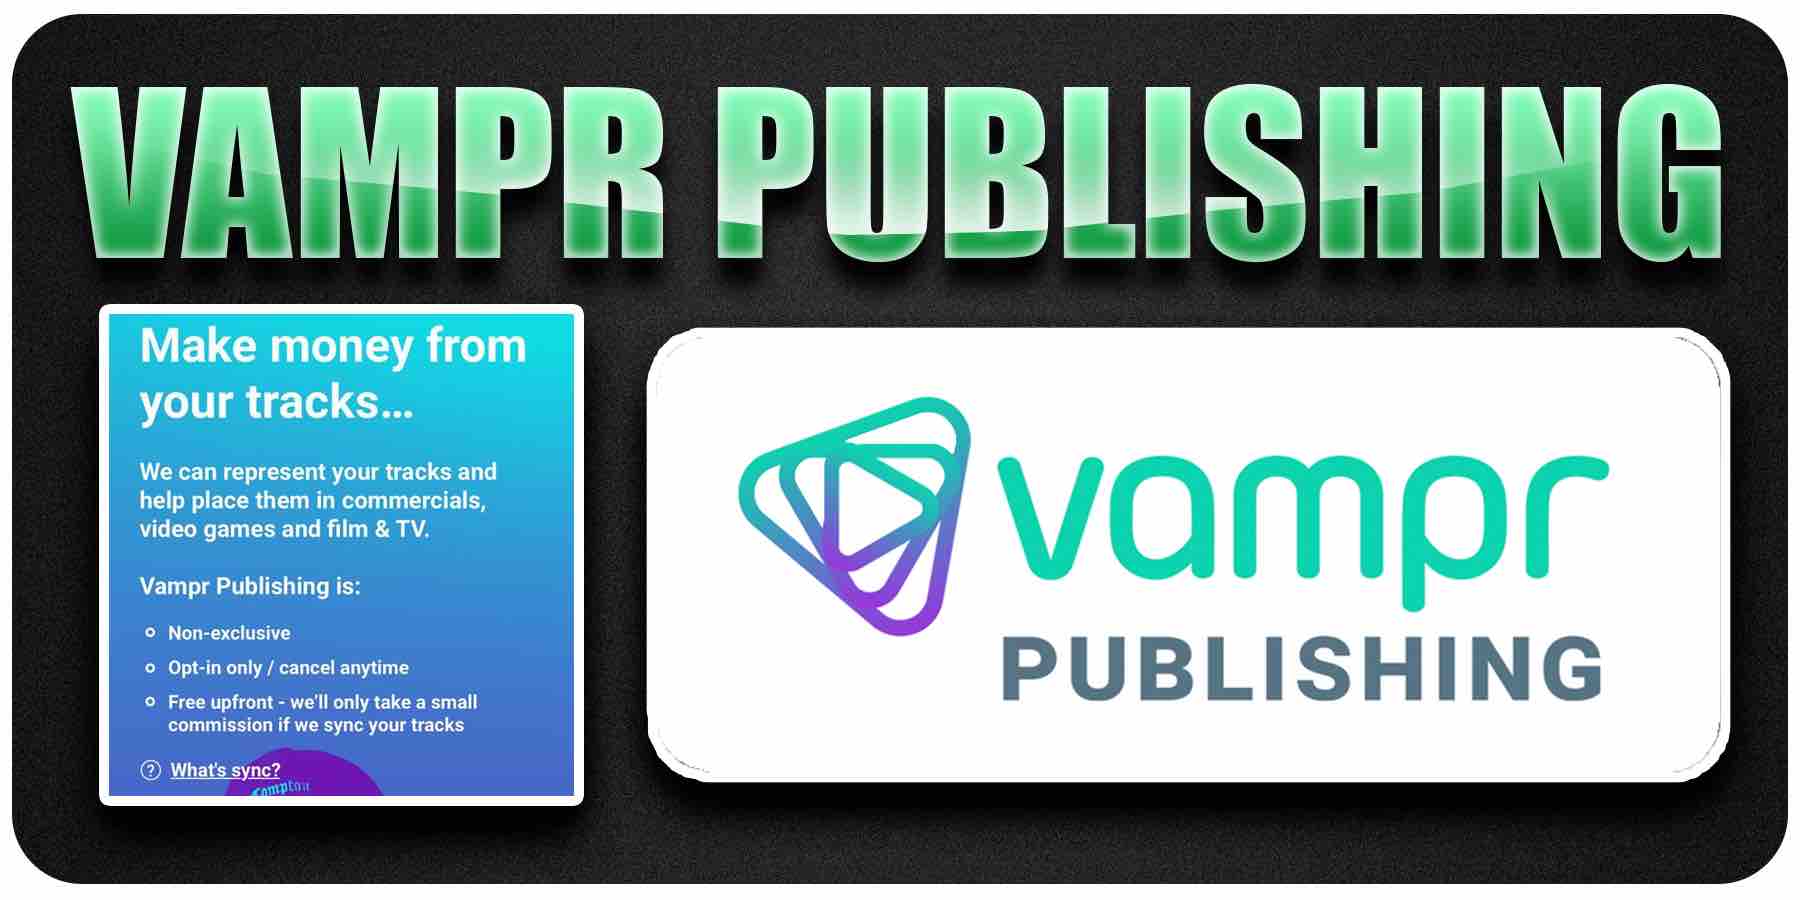 What is Vampr Publishing